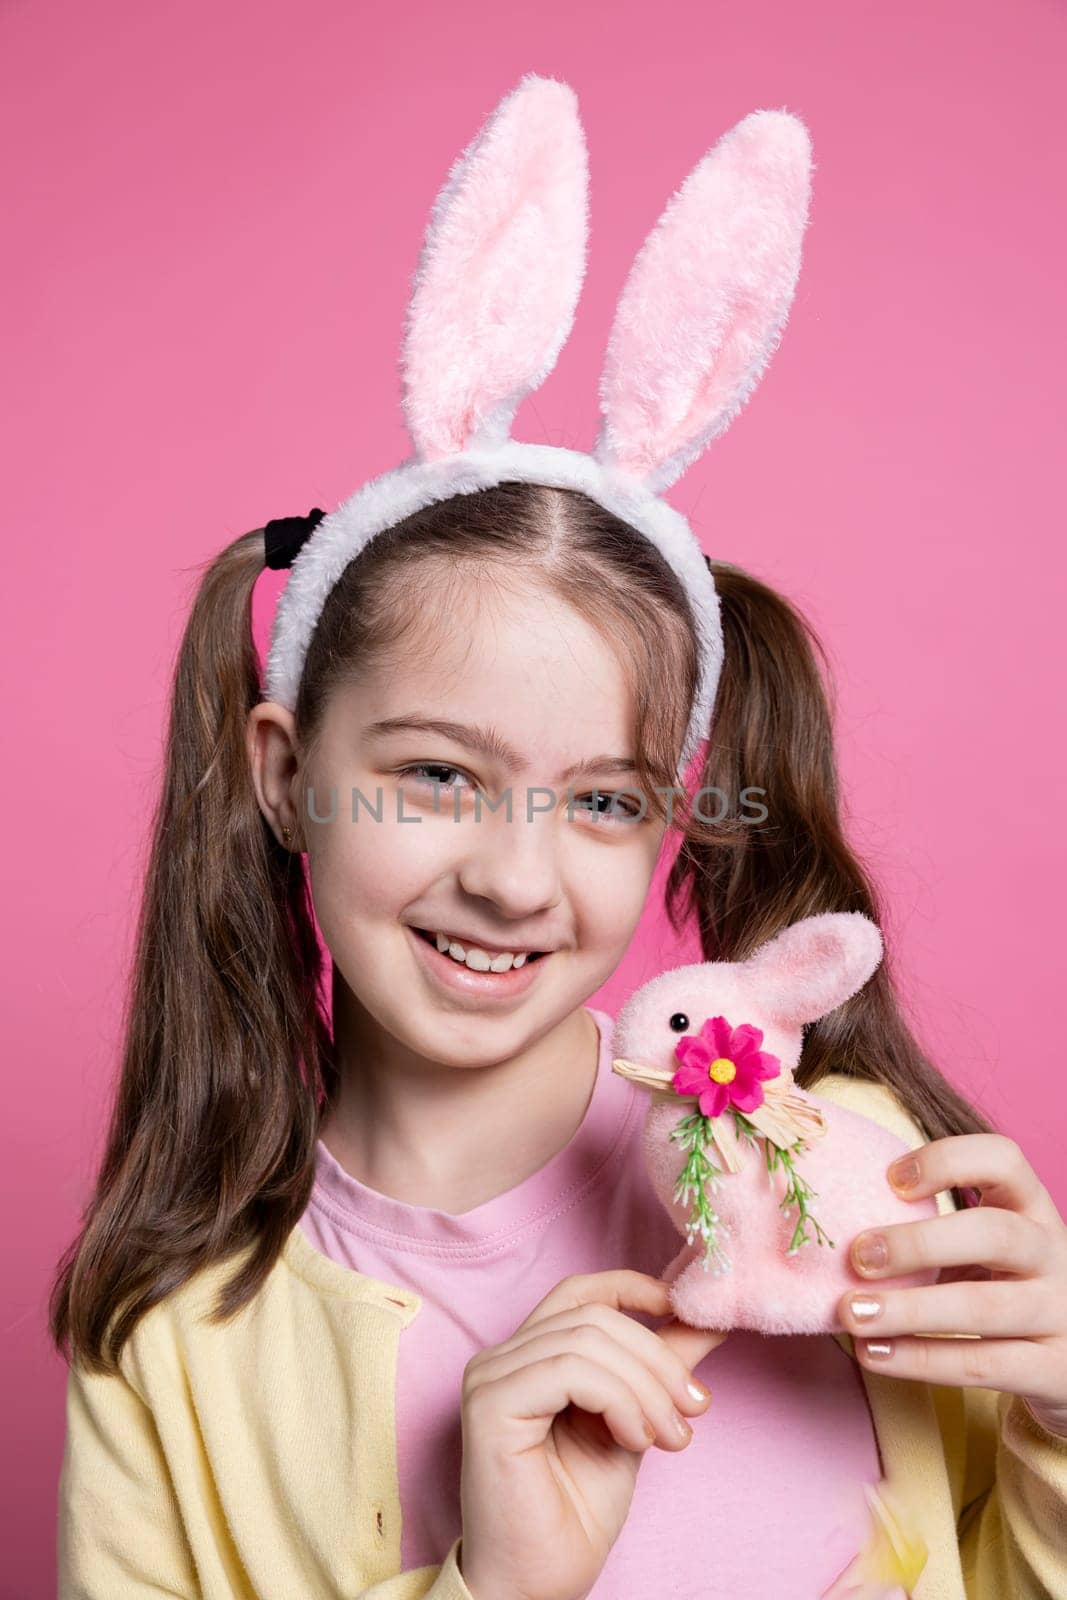 Joyful pretty toddler with bunny ears and pigtails holding a pink rabbit toy by DCStudio